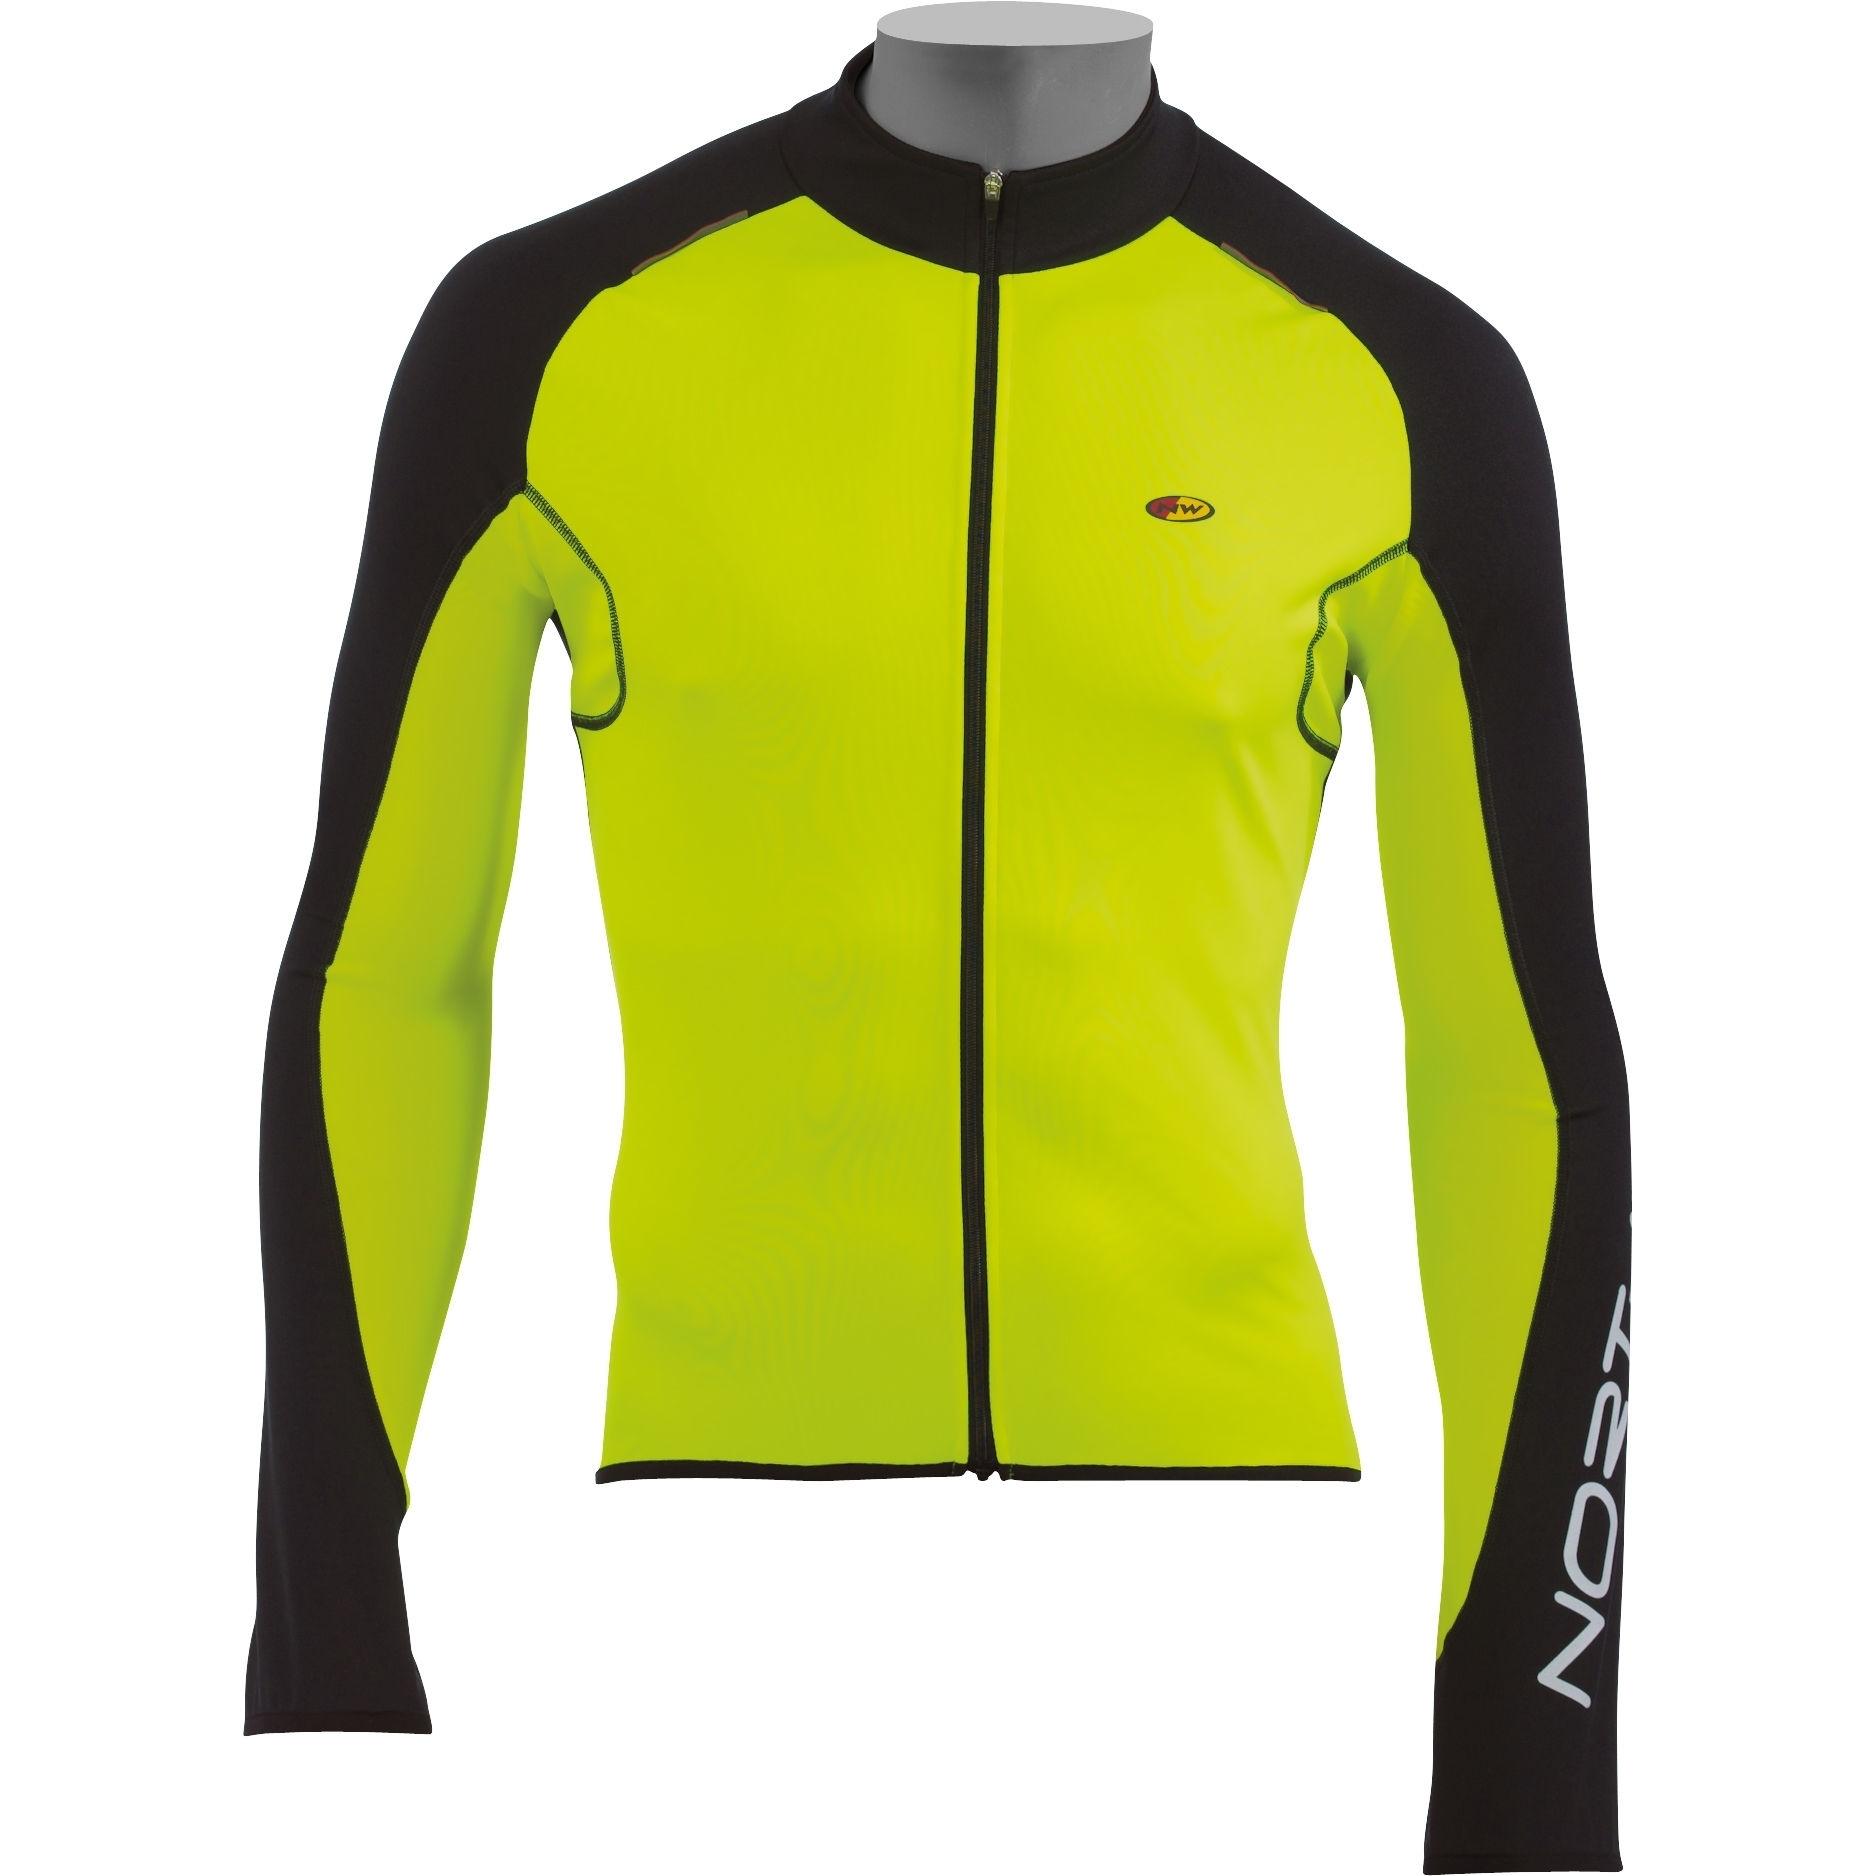 Foto Northwave Blade Jersey Long Sleeve -front protection - yellow/black foto 460258